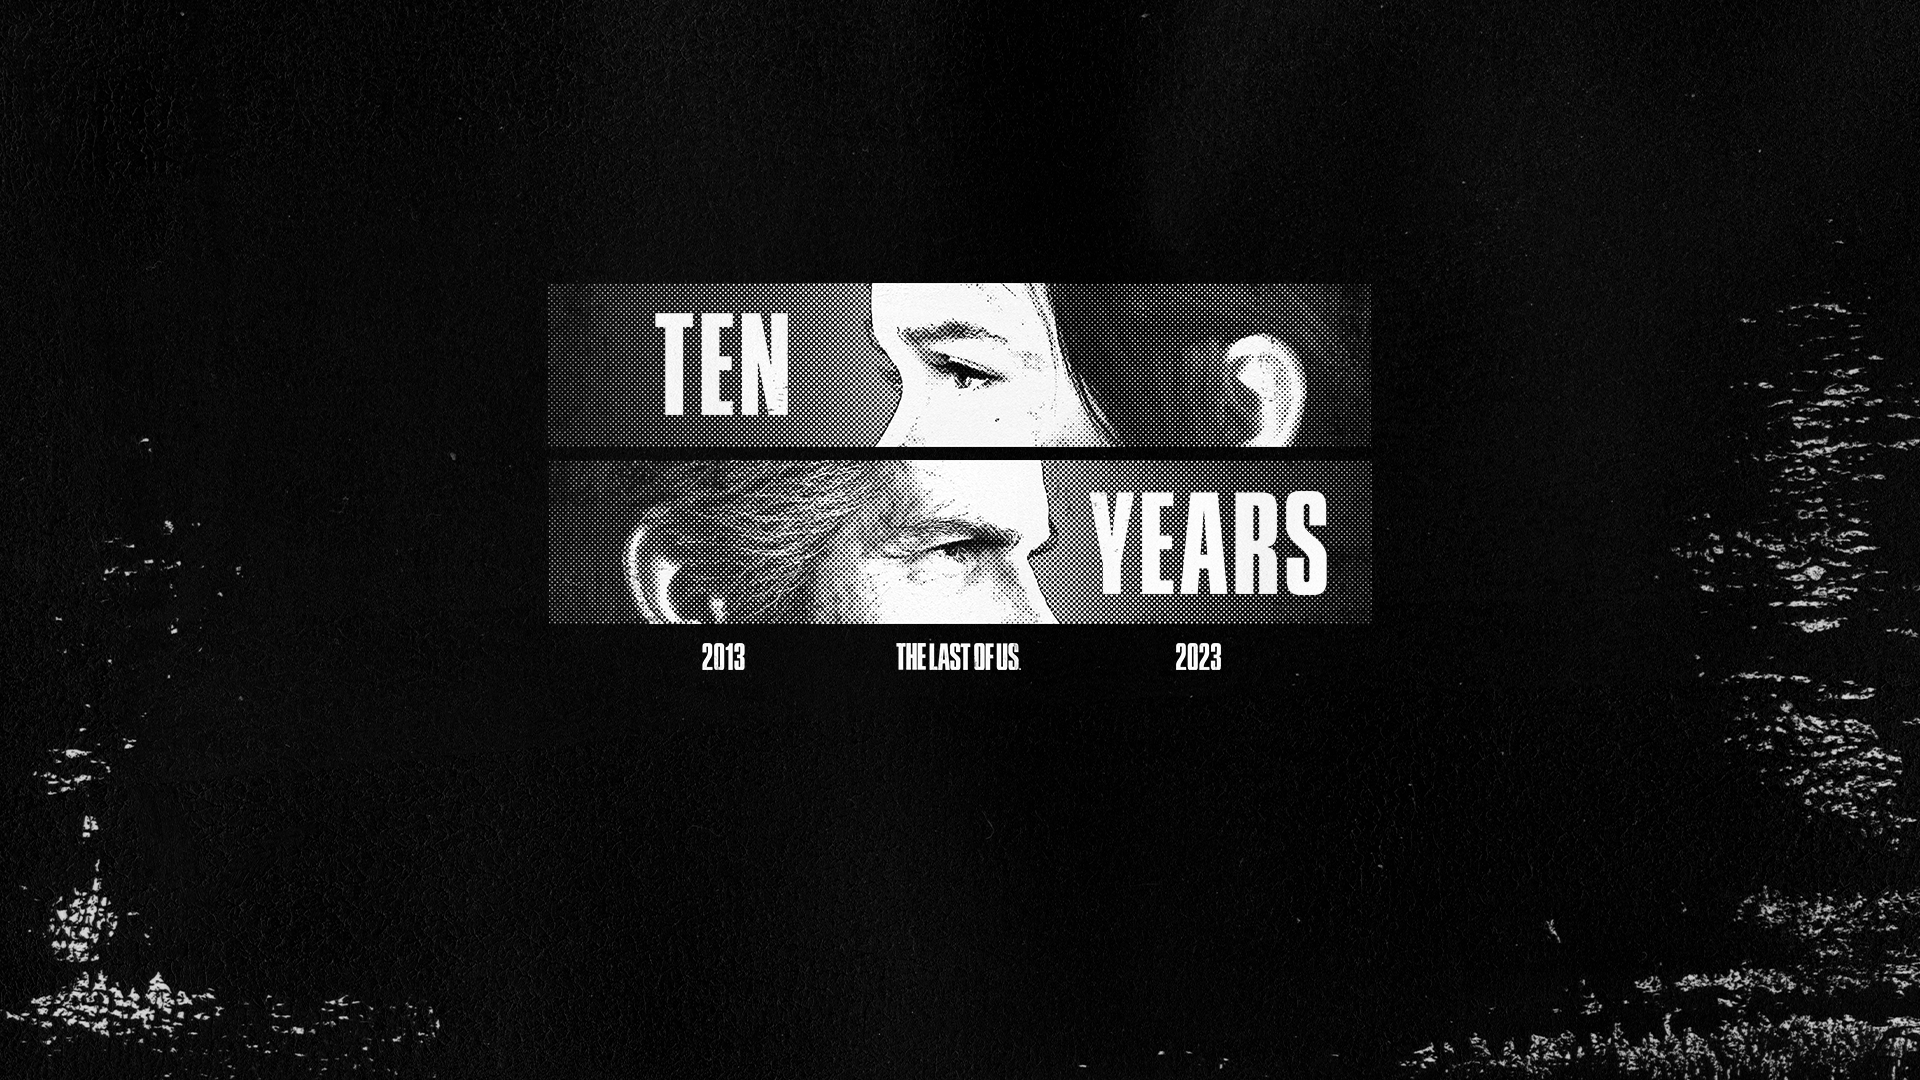 Celebrating the 10th Anniversary of The Last of Us